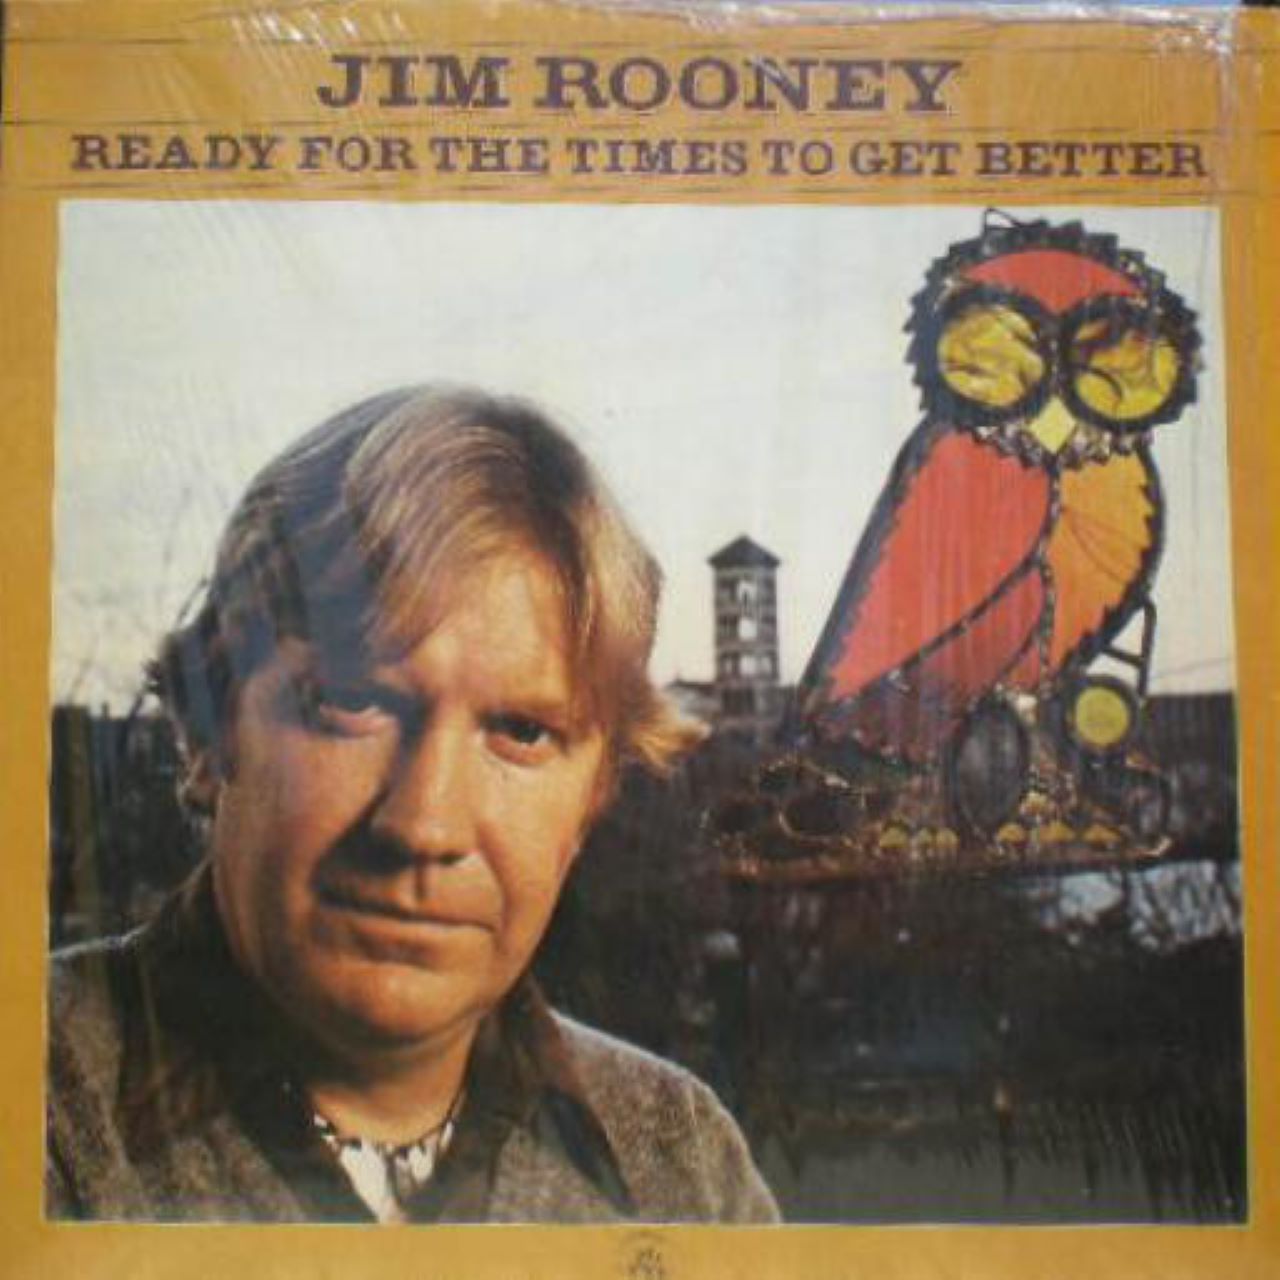 Jim Rooney - Ready For The Times To Get Better cover album